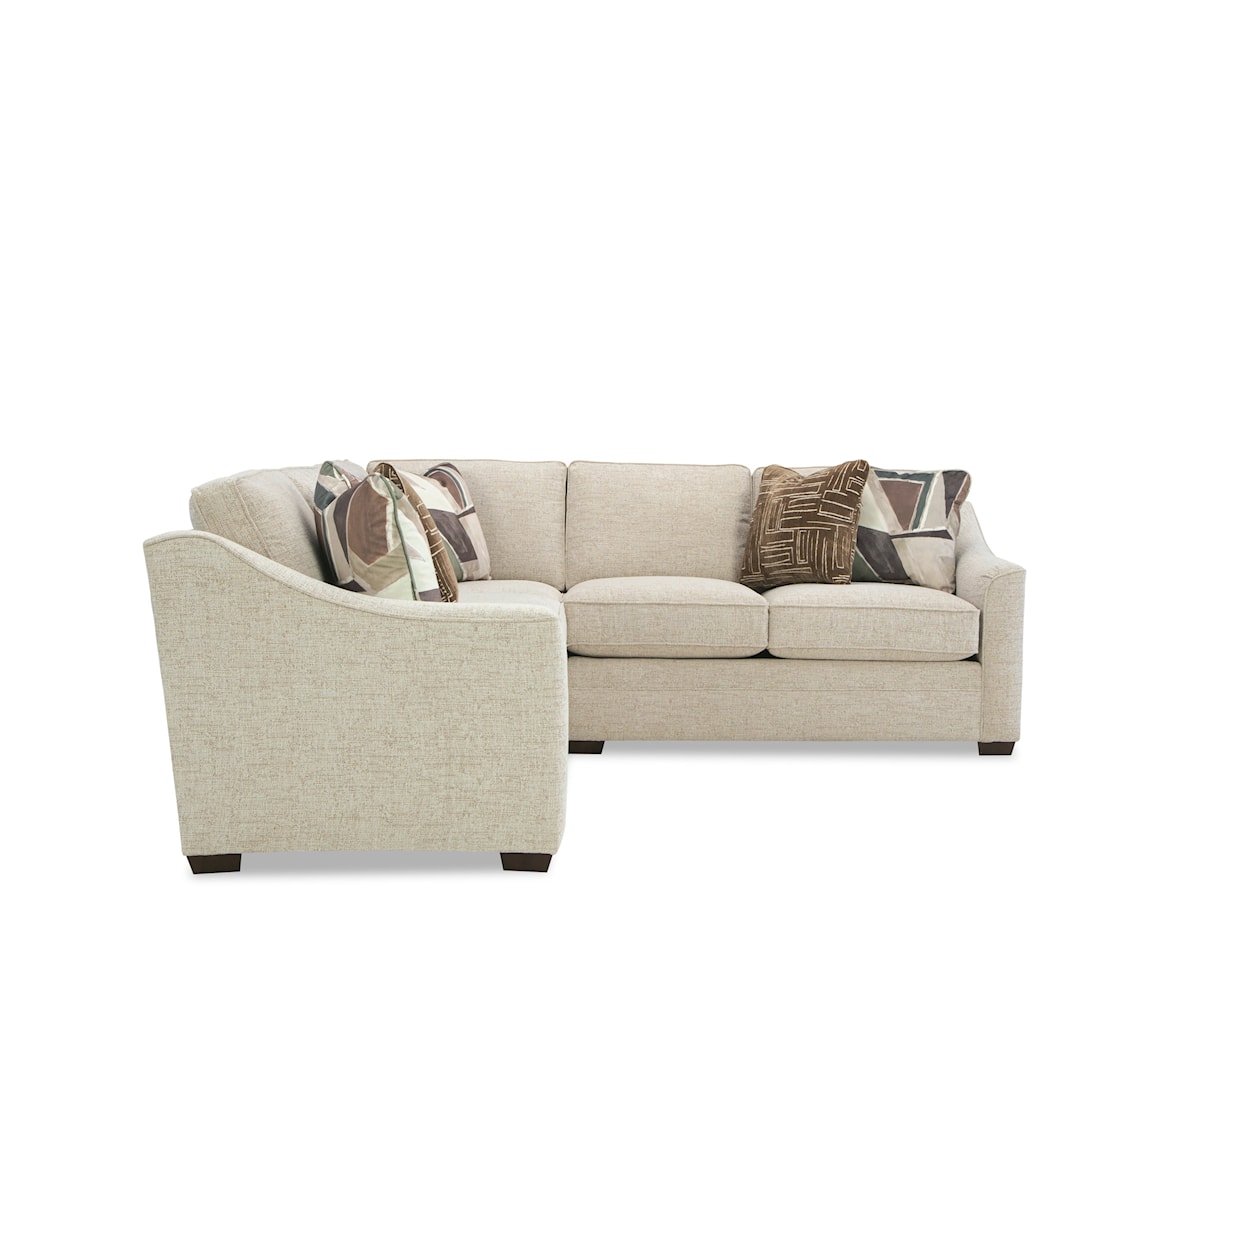 Hickory Craft F9 Series 2 Pc Customizable Sectional Sofa